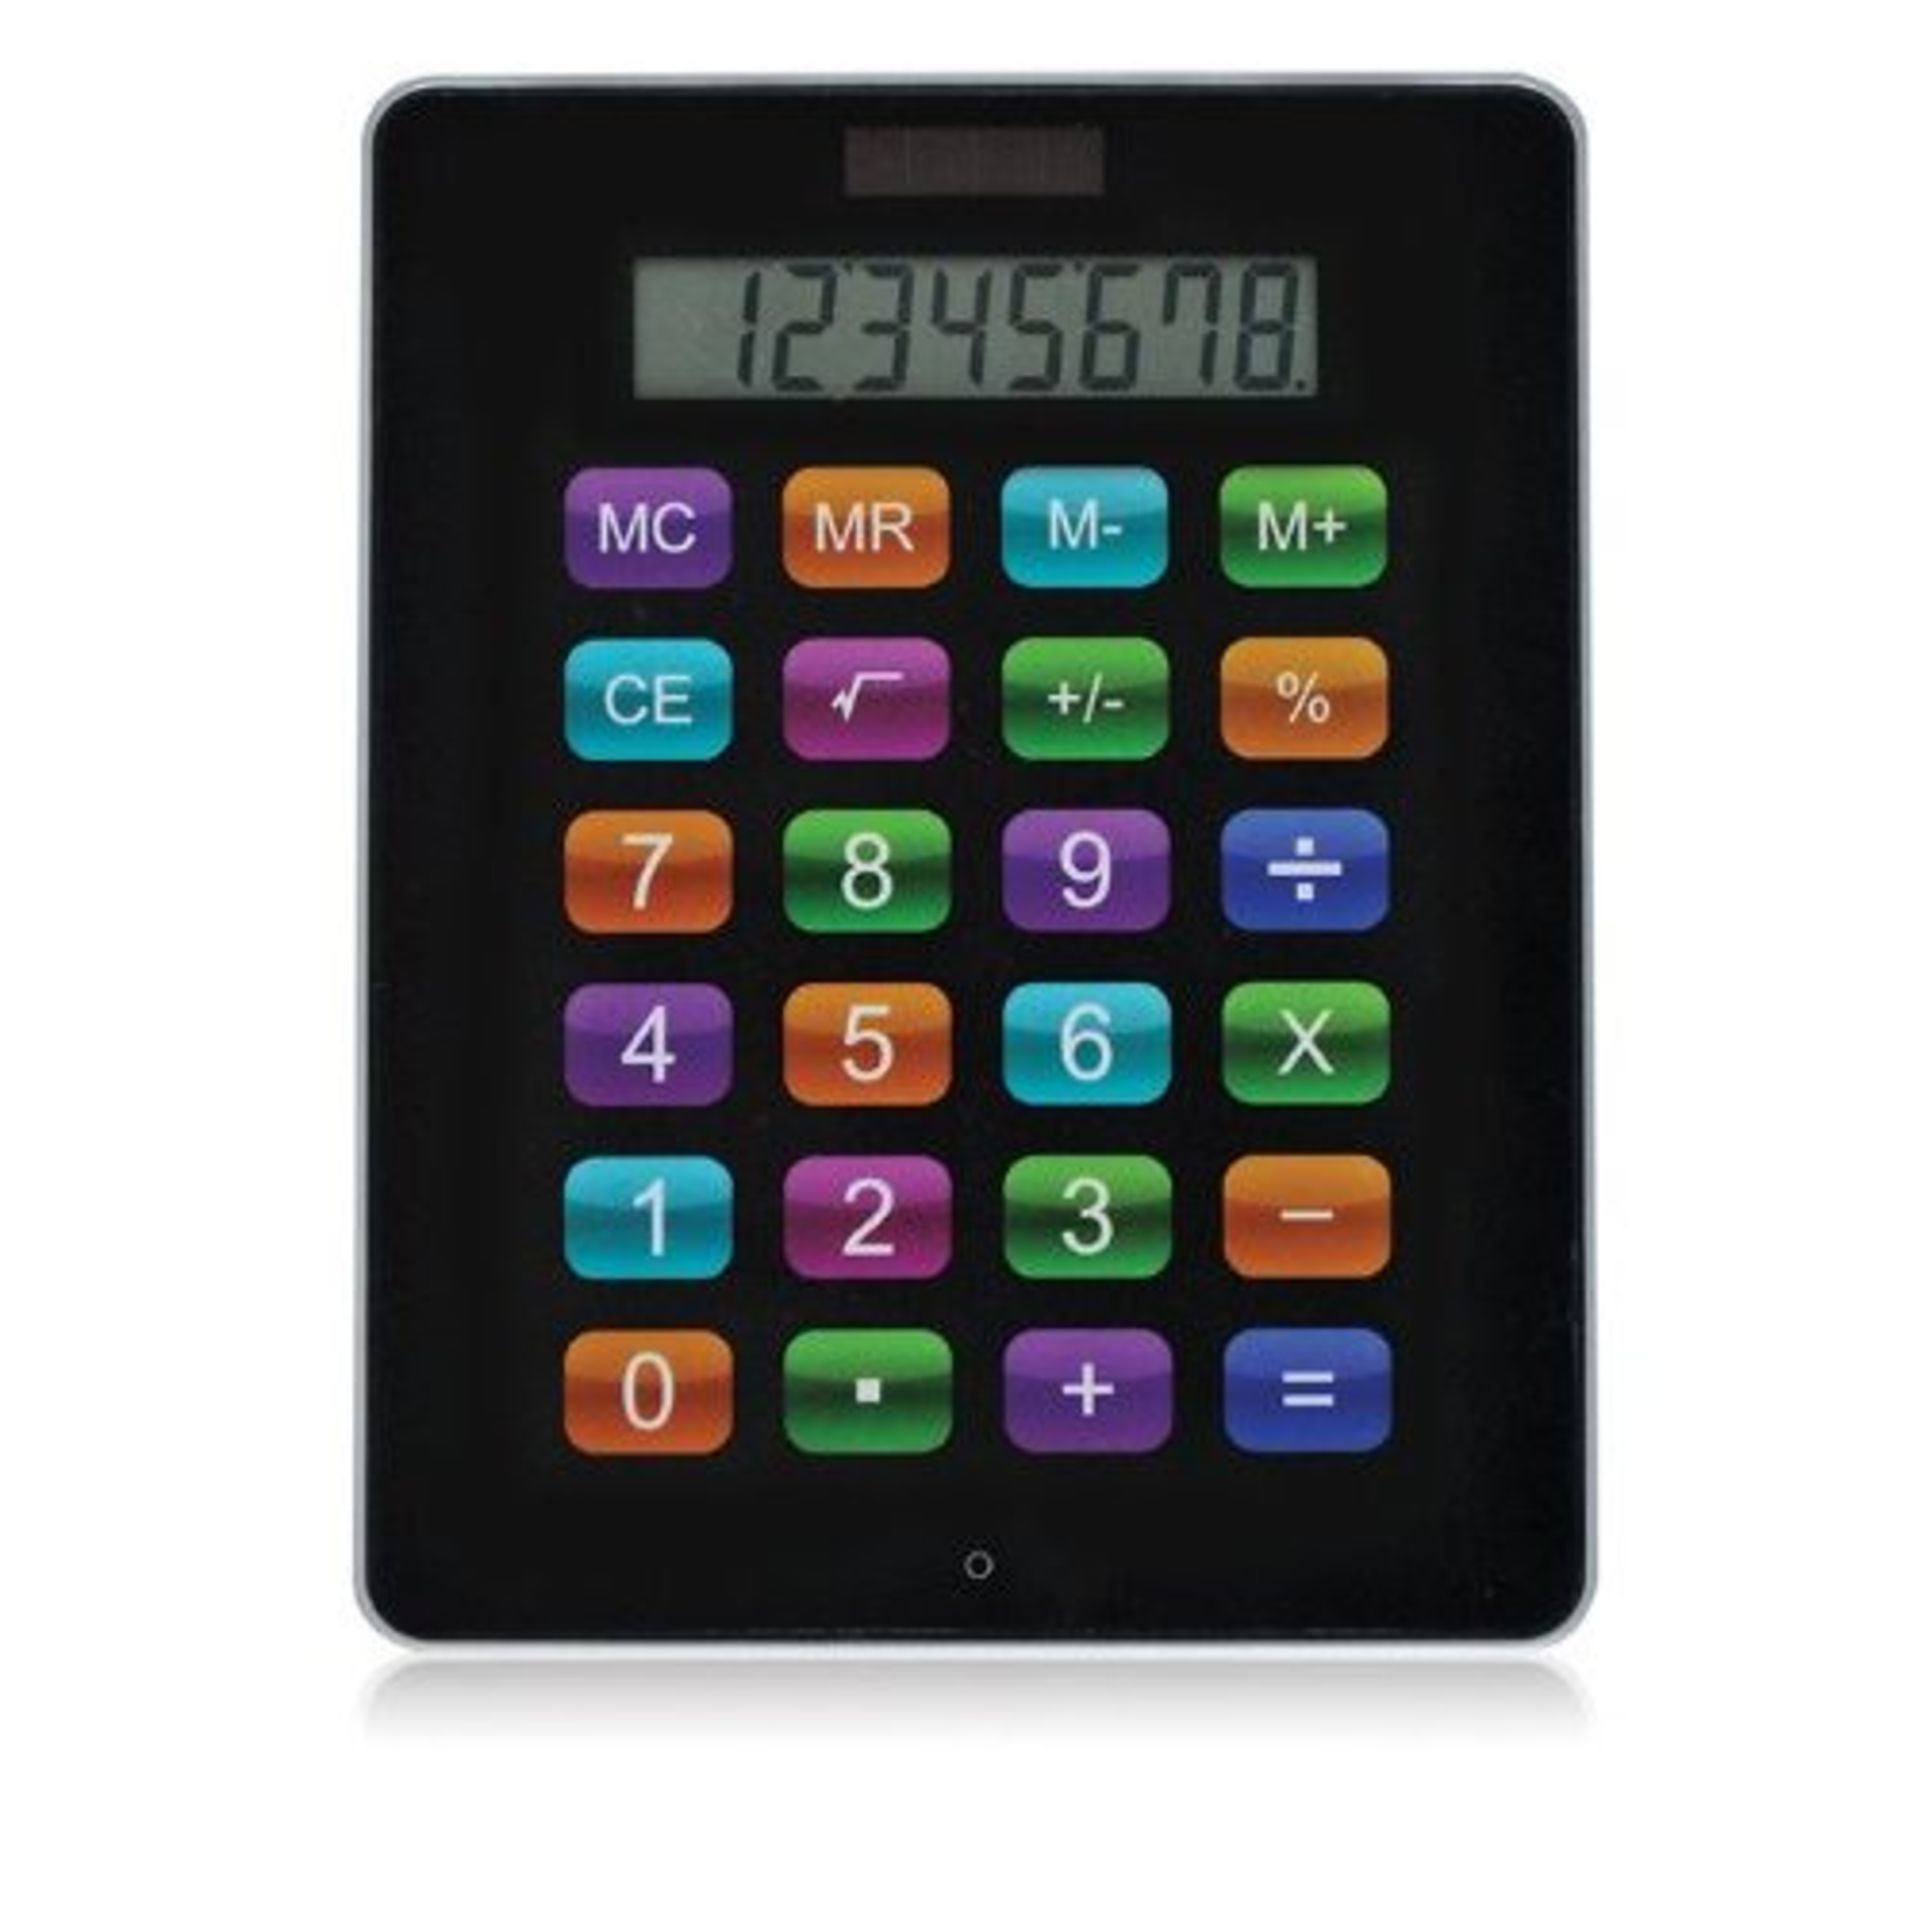 V *TRADE QTY* Brand New Ipad Calculator-Battery powered with solar backup X 6 YOUR BID PRICE TO BE